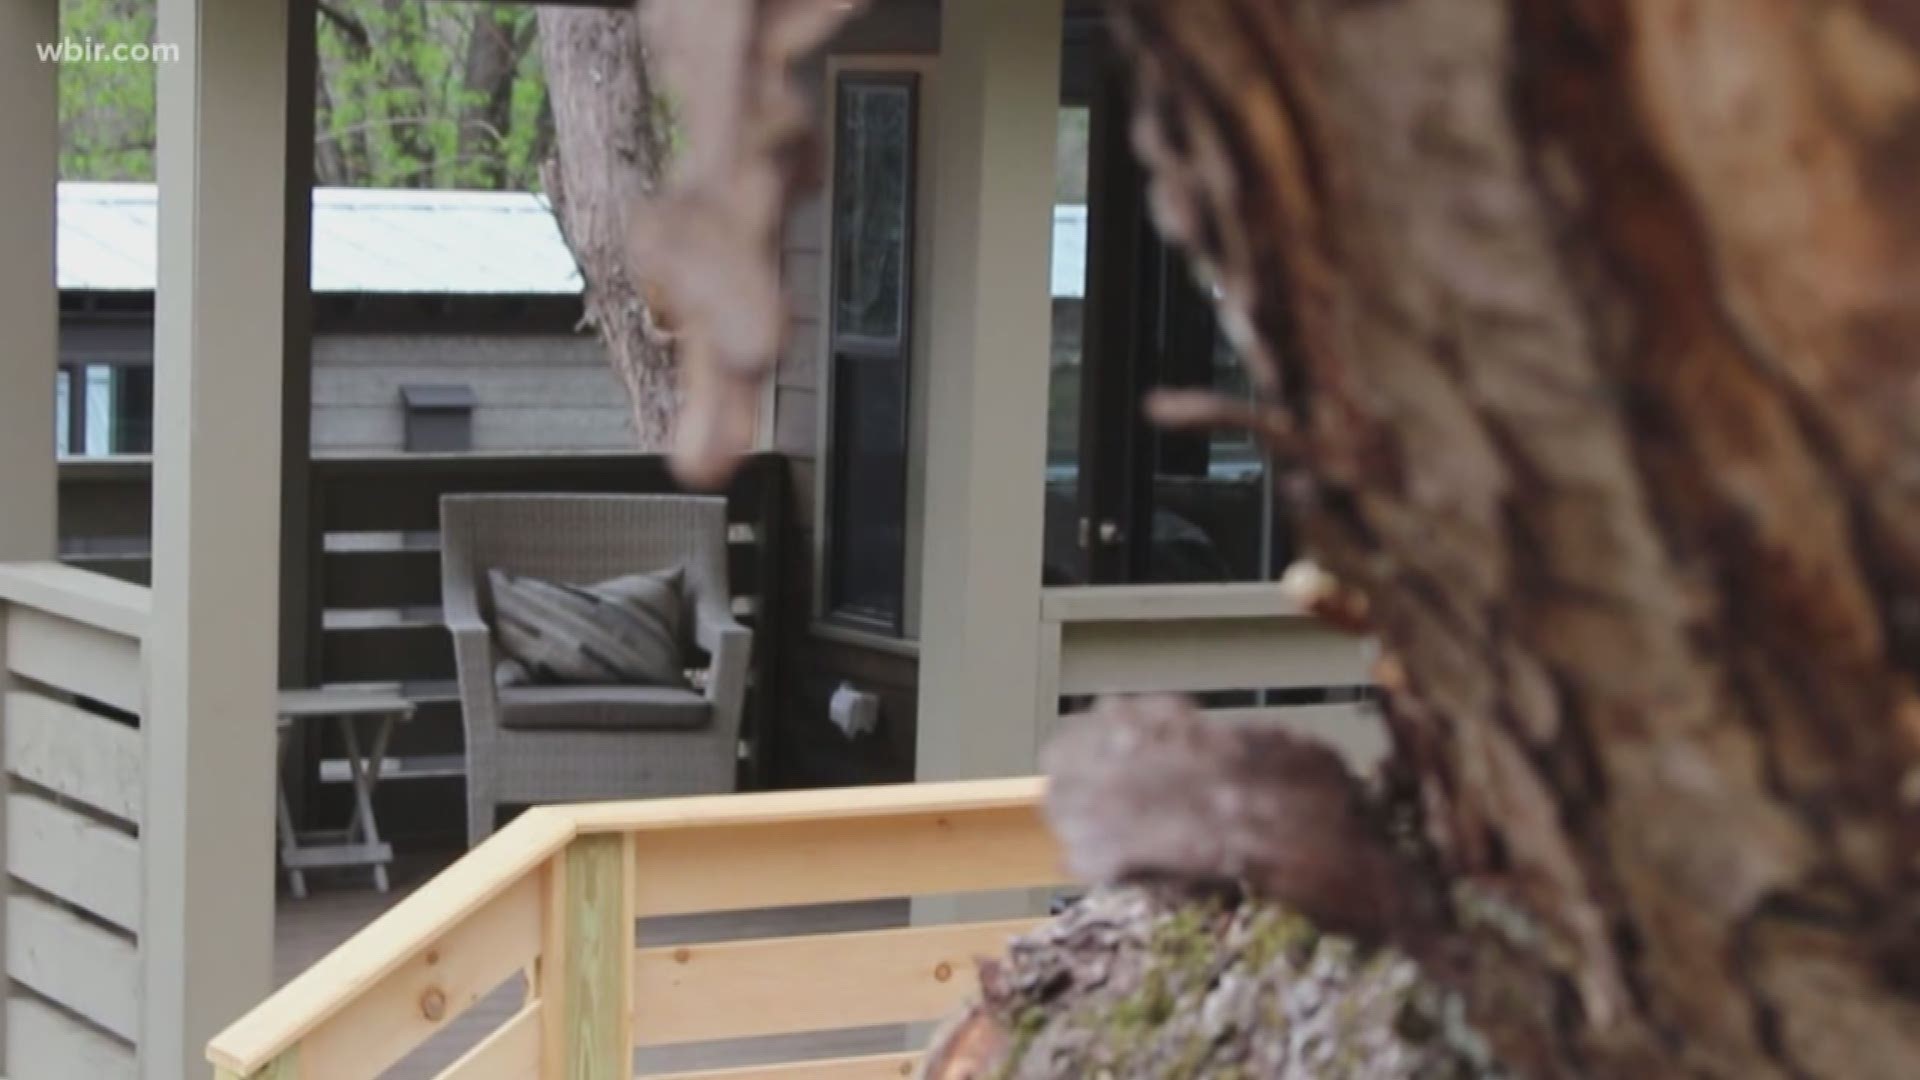 Tiny Homes are taking "glamping" to a whole new level.